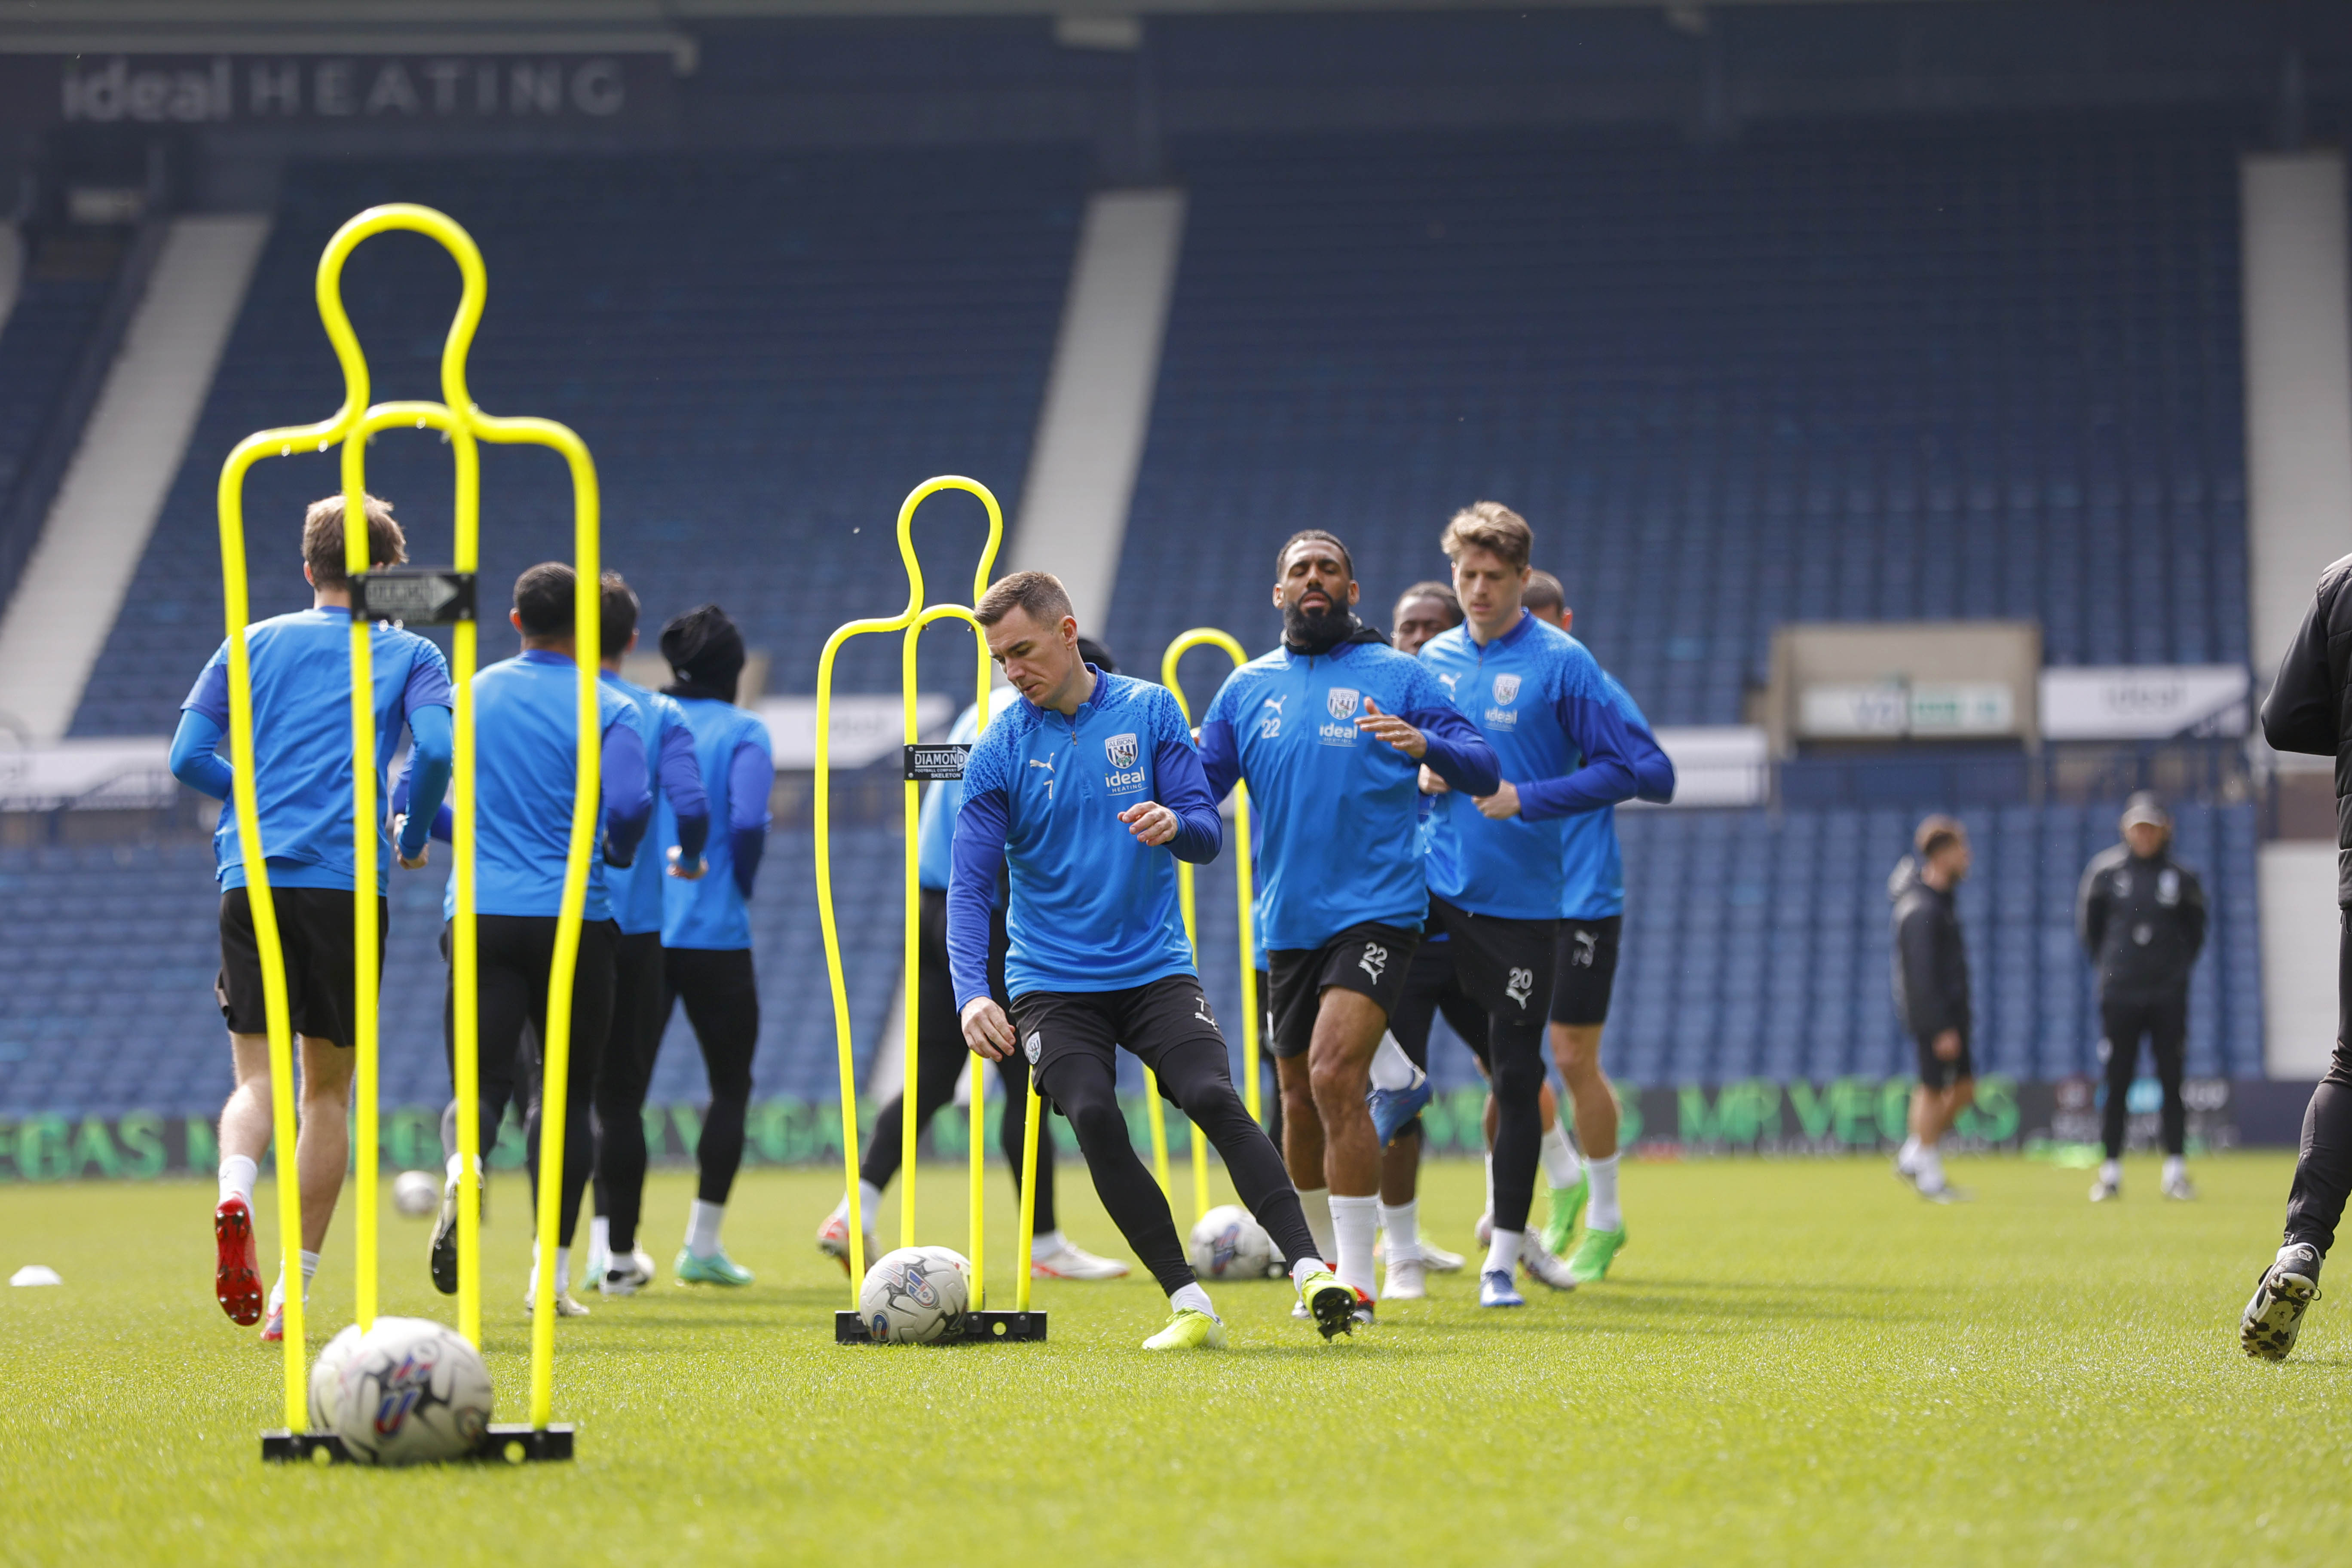 Albion players warming up on the pitch at The Hawthorns during a training session